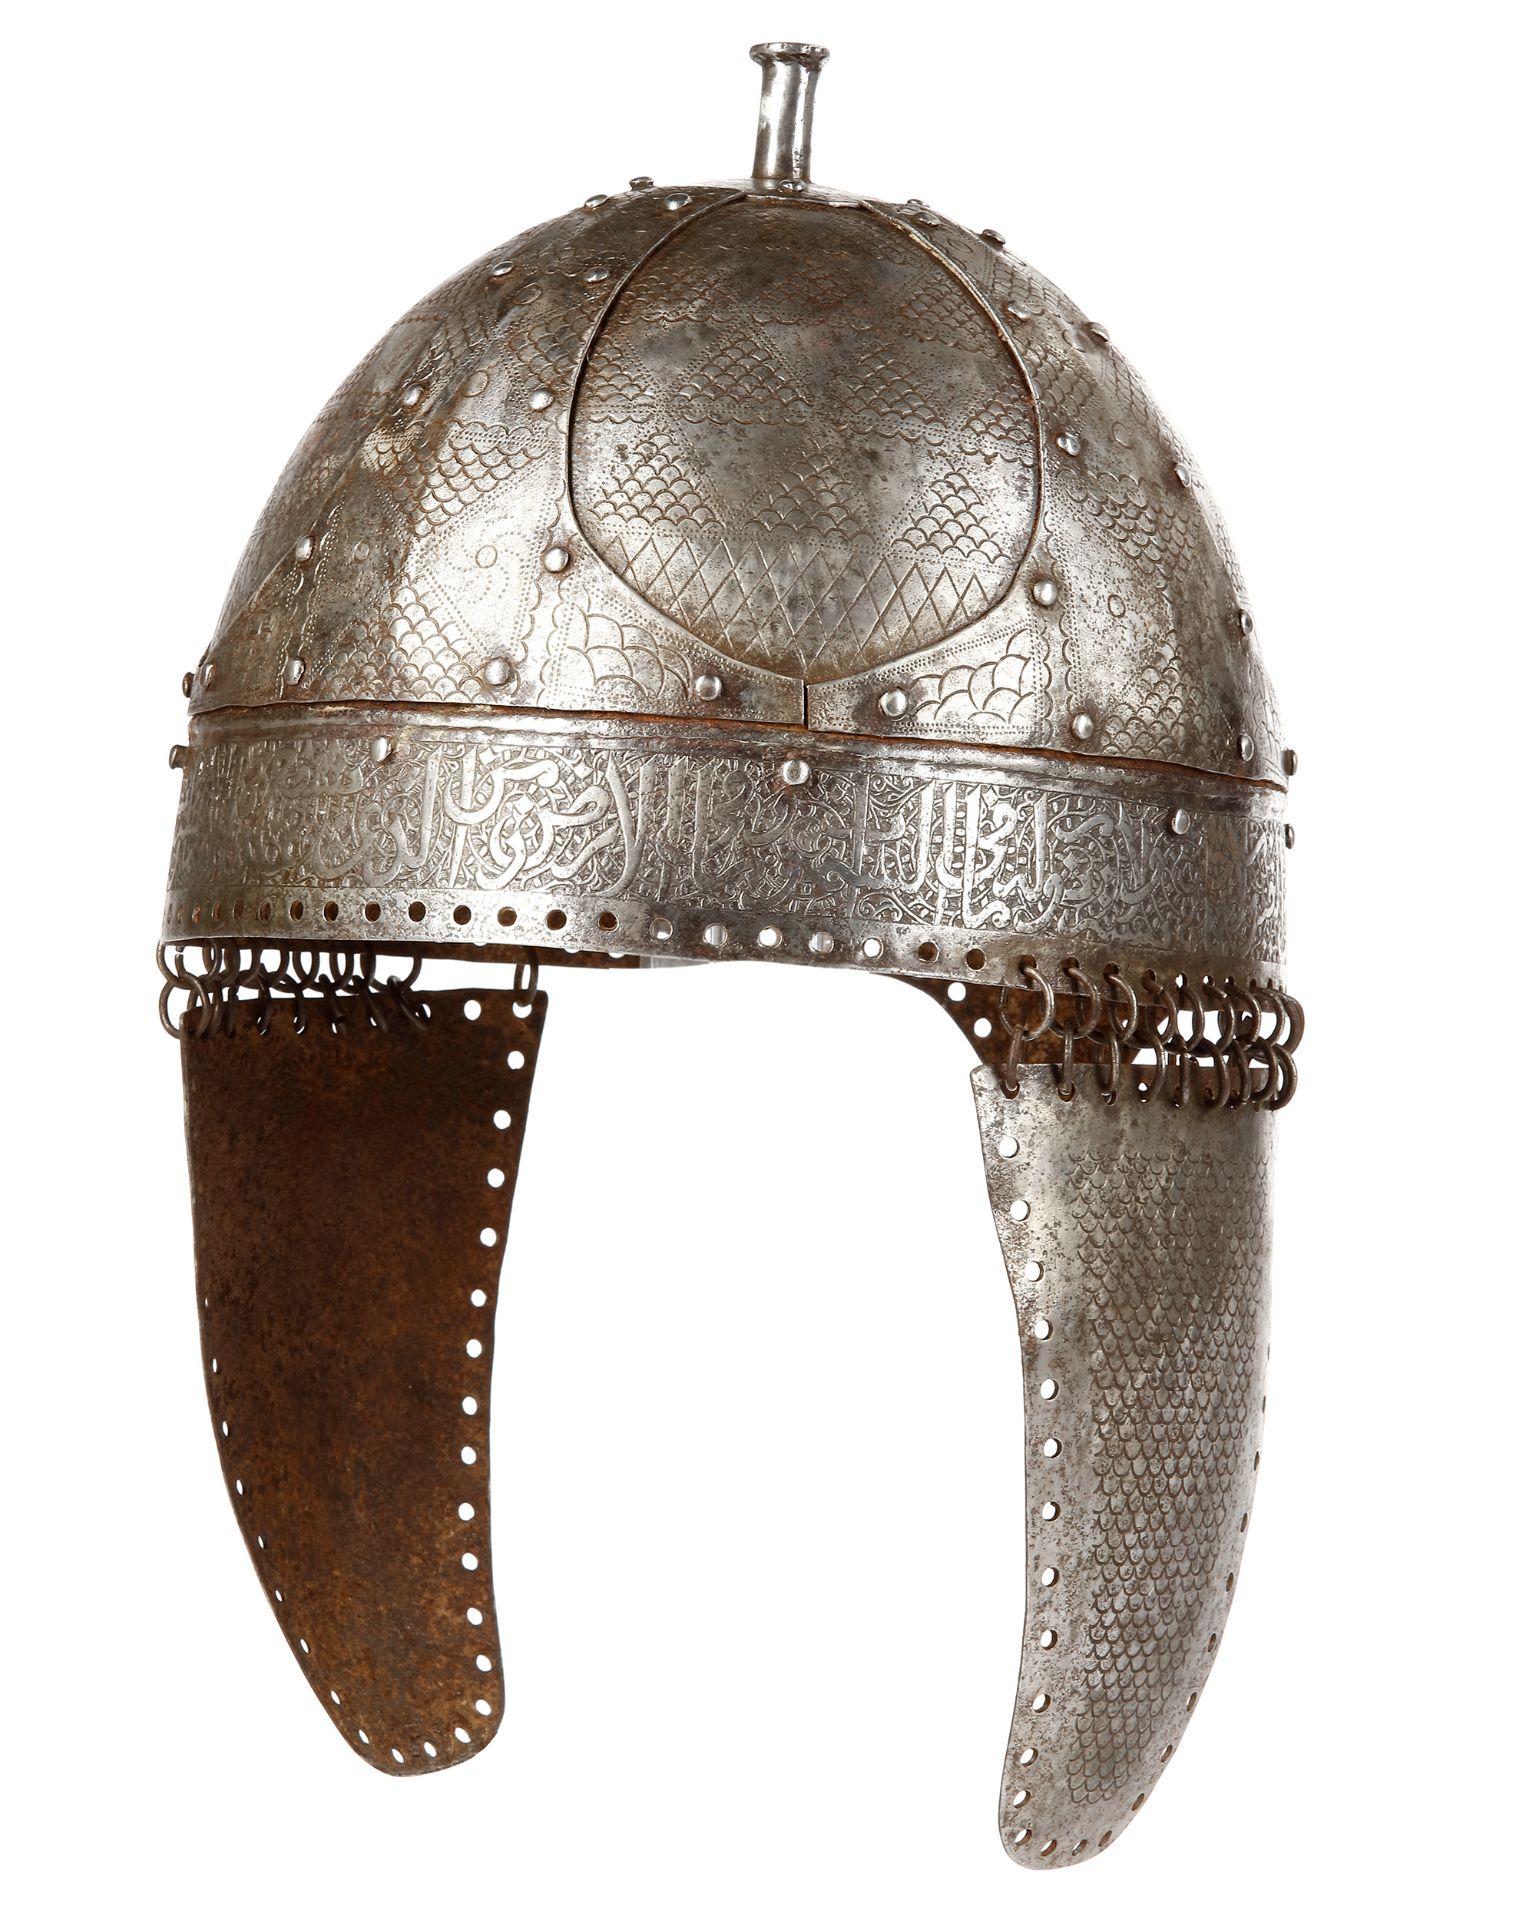 A STEEL HELMET, MUGHAL, INDIA, 17TH-18TH CENTURY - Image 7 of 12